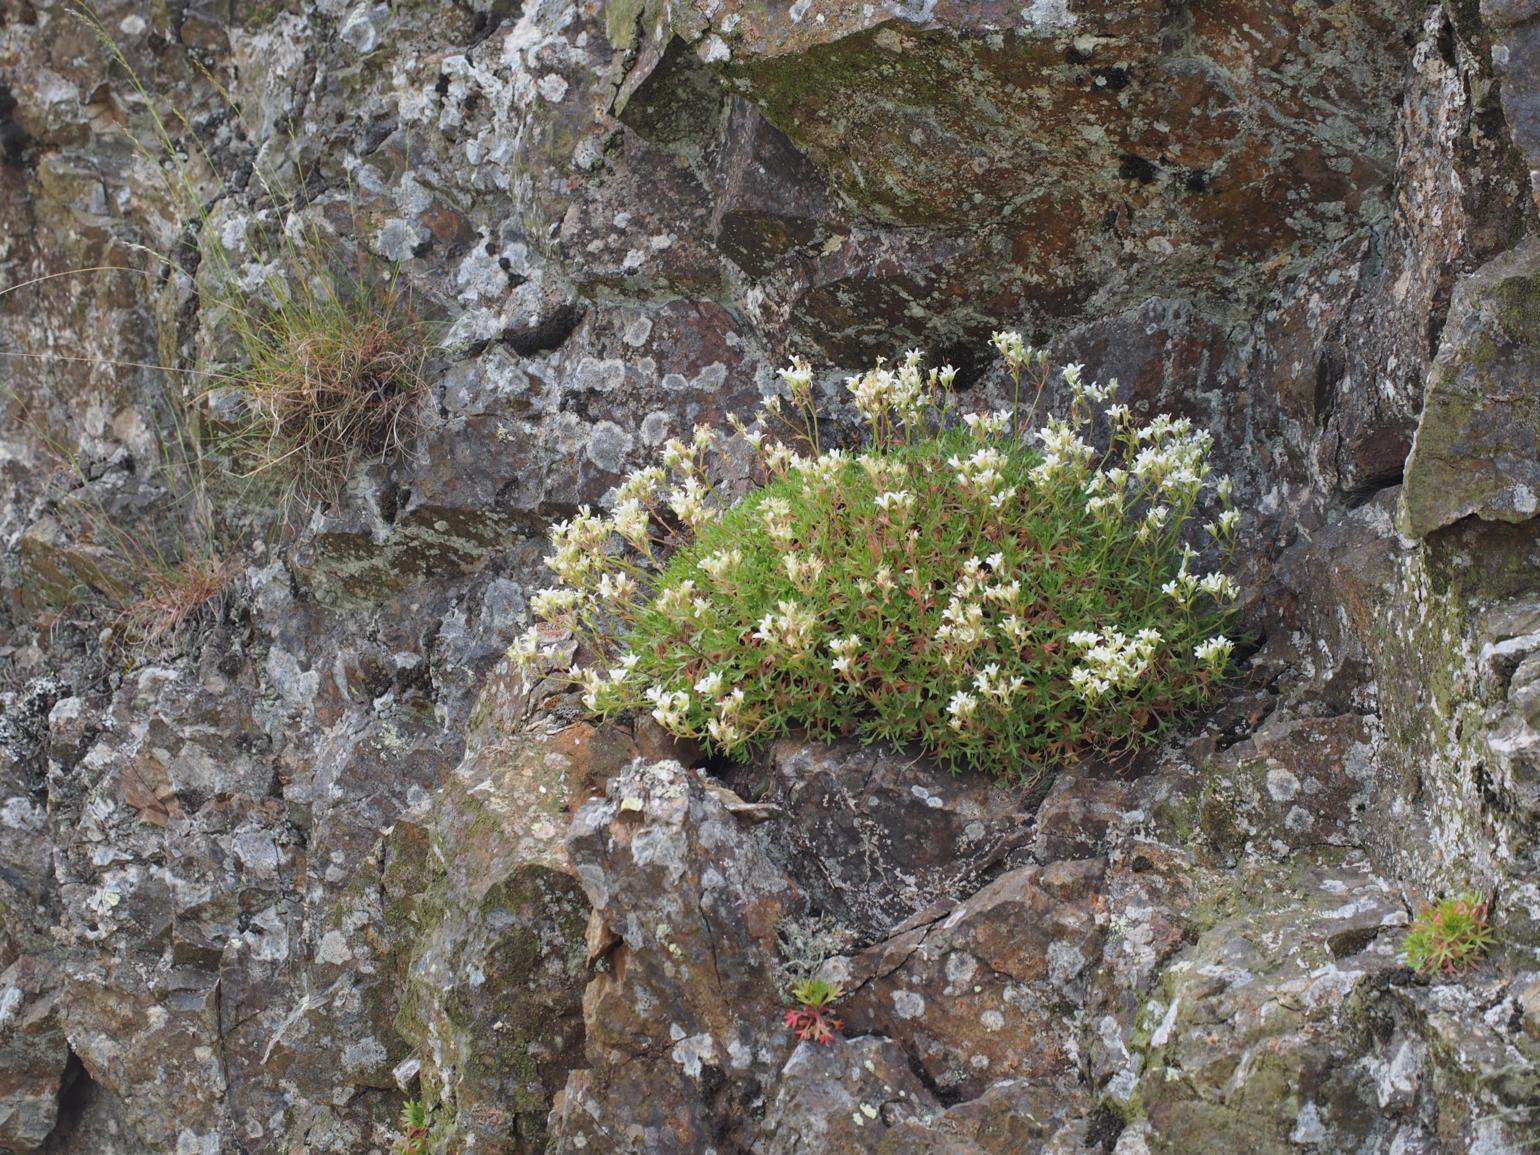 Saxifrage of Prost